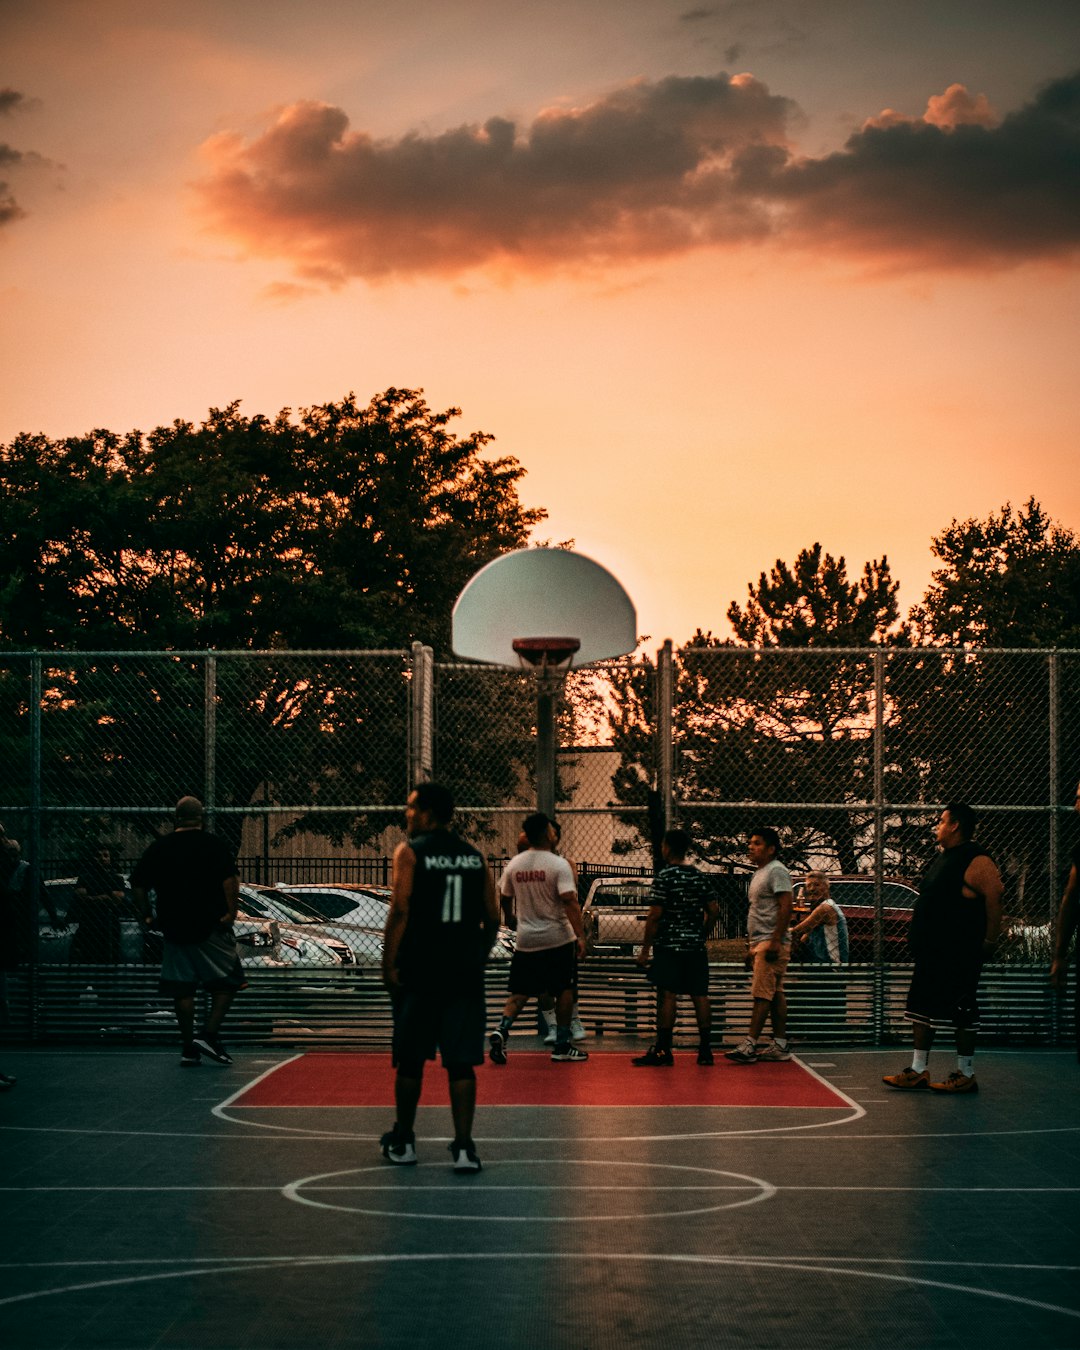 people playing basketball on court during sunset